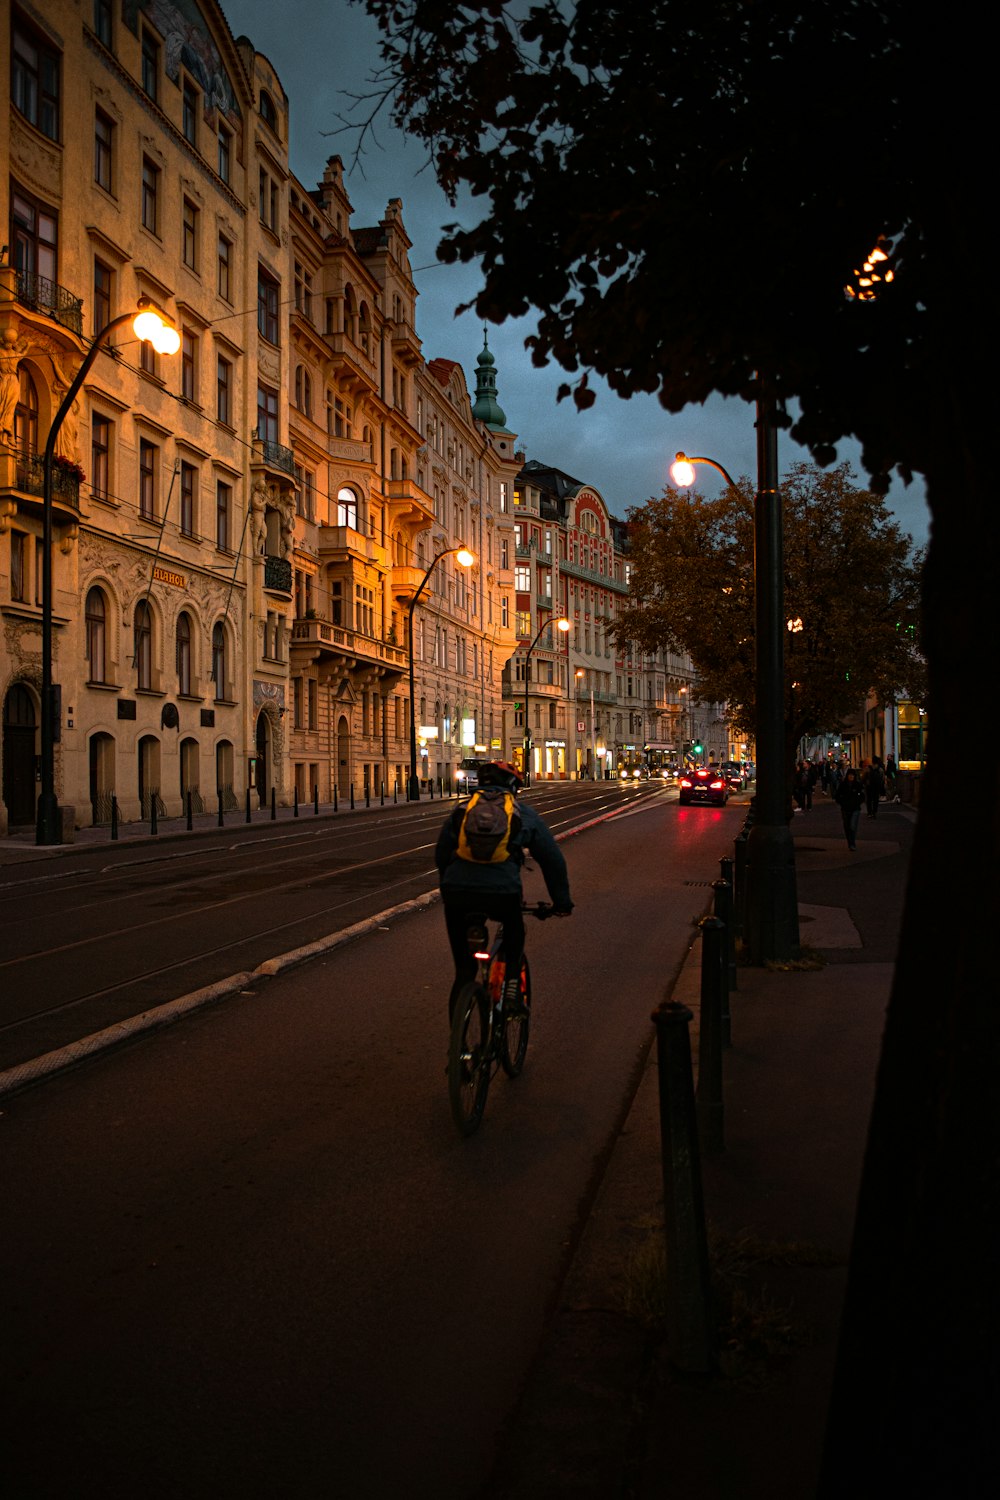 man riding bicycle beside buildings during nighttime